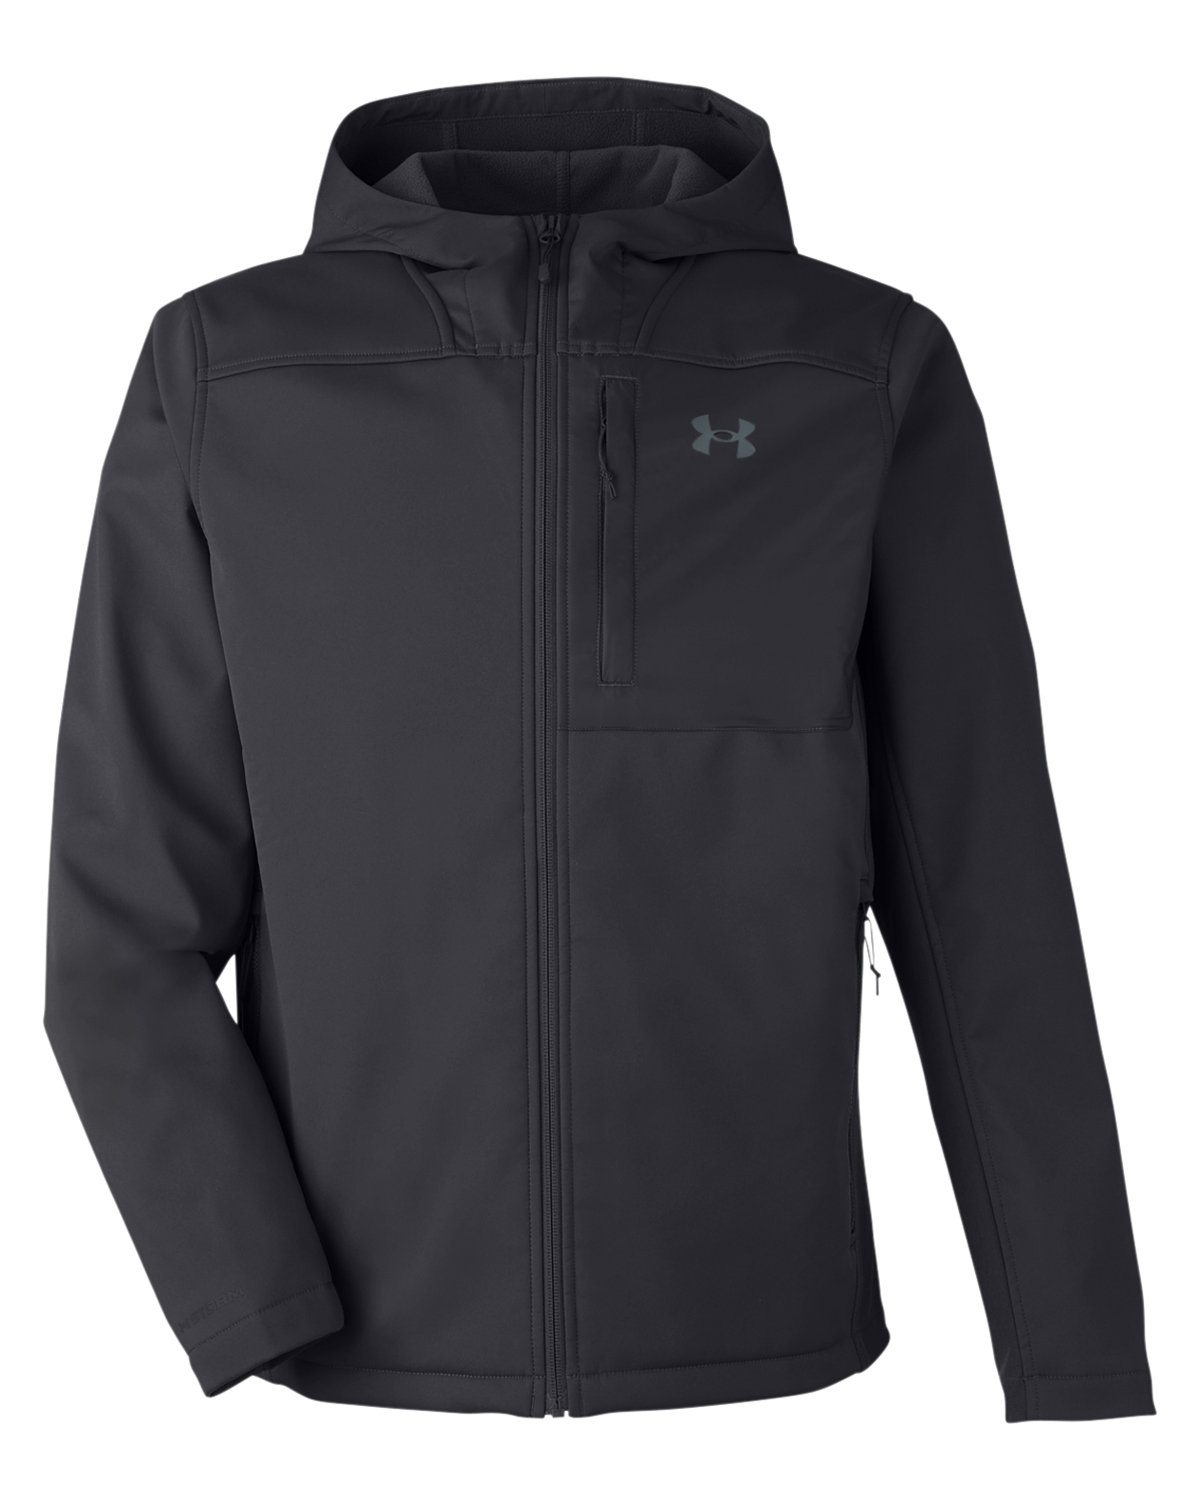 Flash Sales‼️Brand New‼️Under Armour Coldgear Jacket in Black